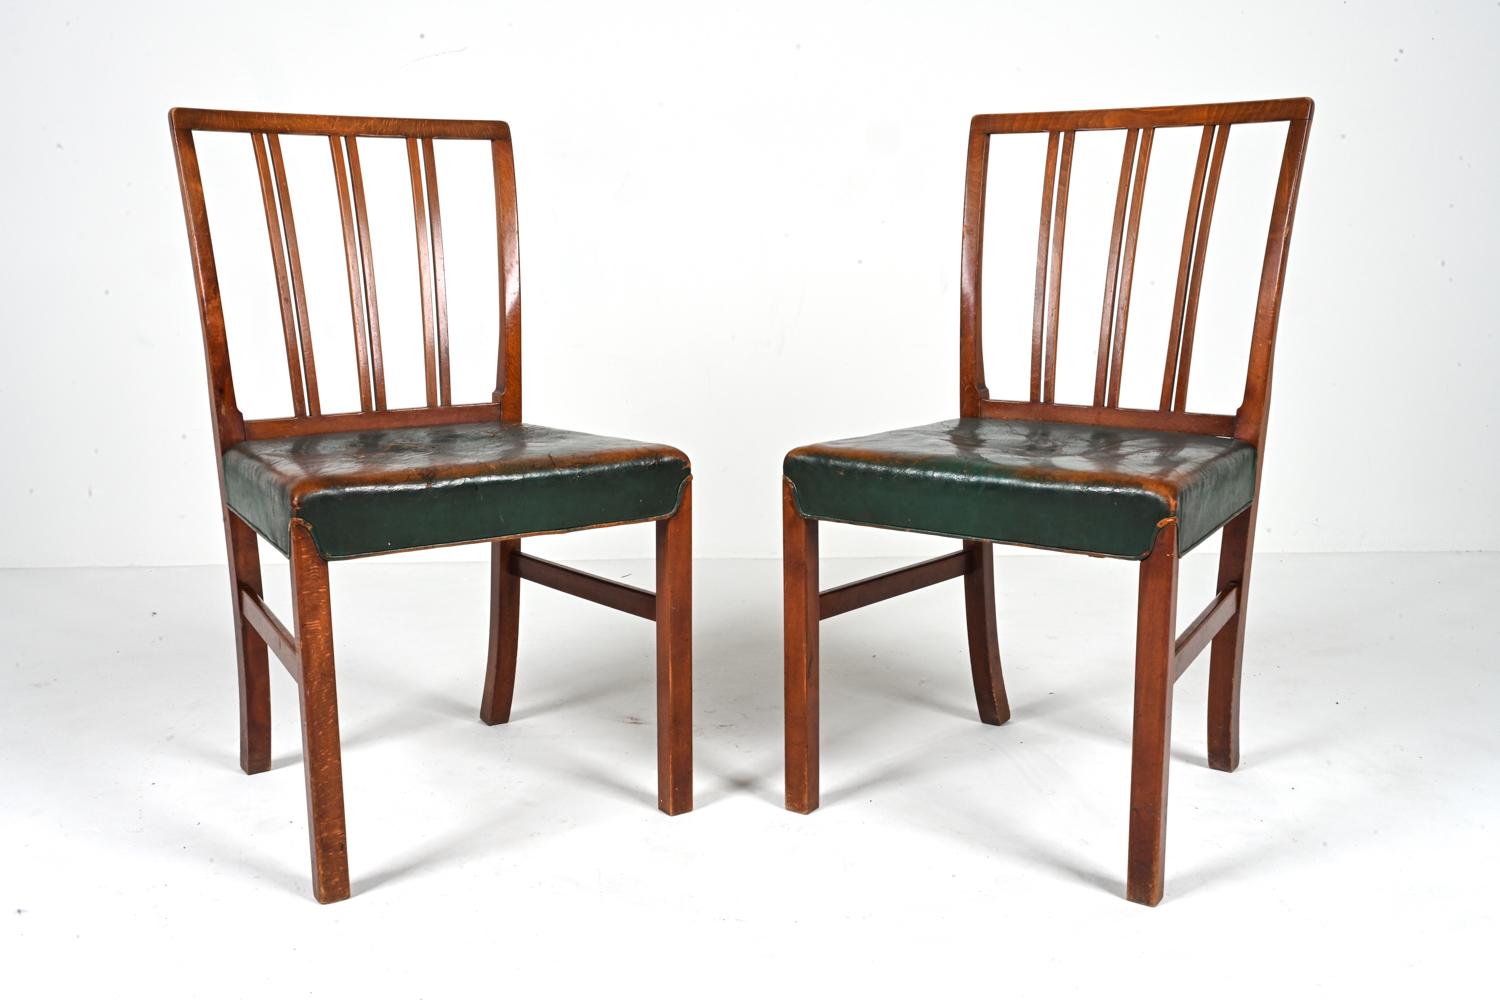 '12' Rare Model 1675B Dining Chairs by Ole Wanscher Fritz Hansen, c. 1940's For Sale 1